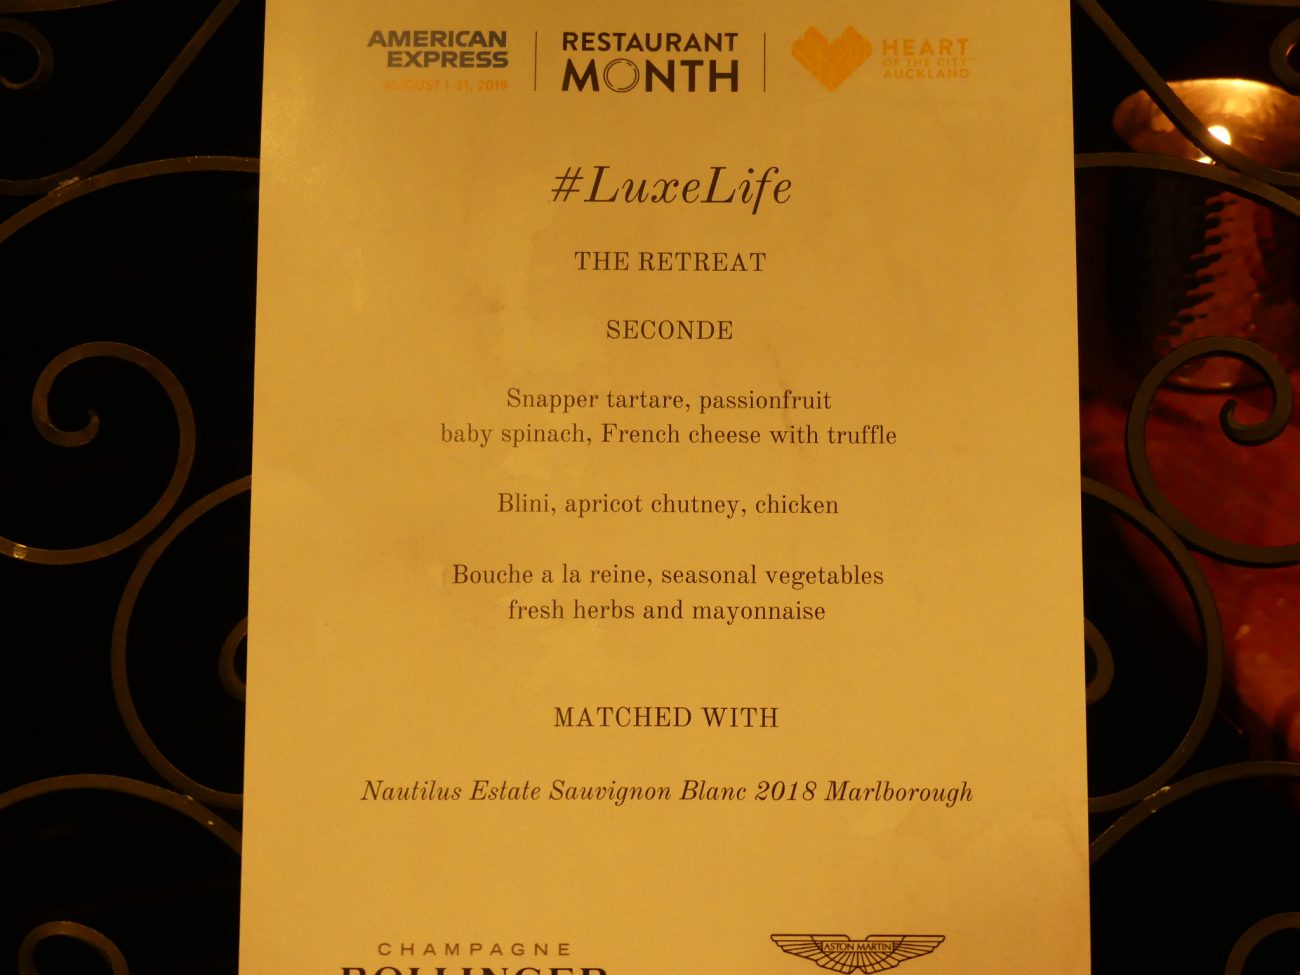 LuxeLife American Express Restaurant Month